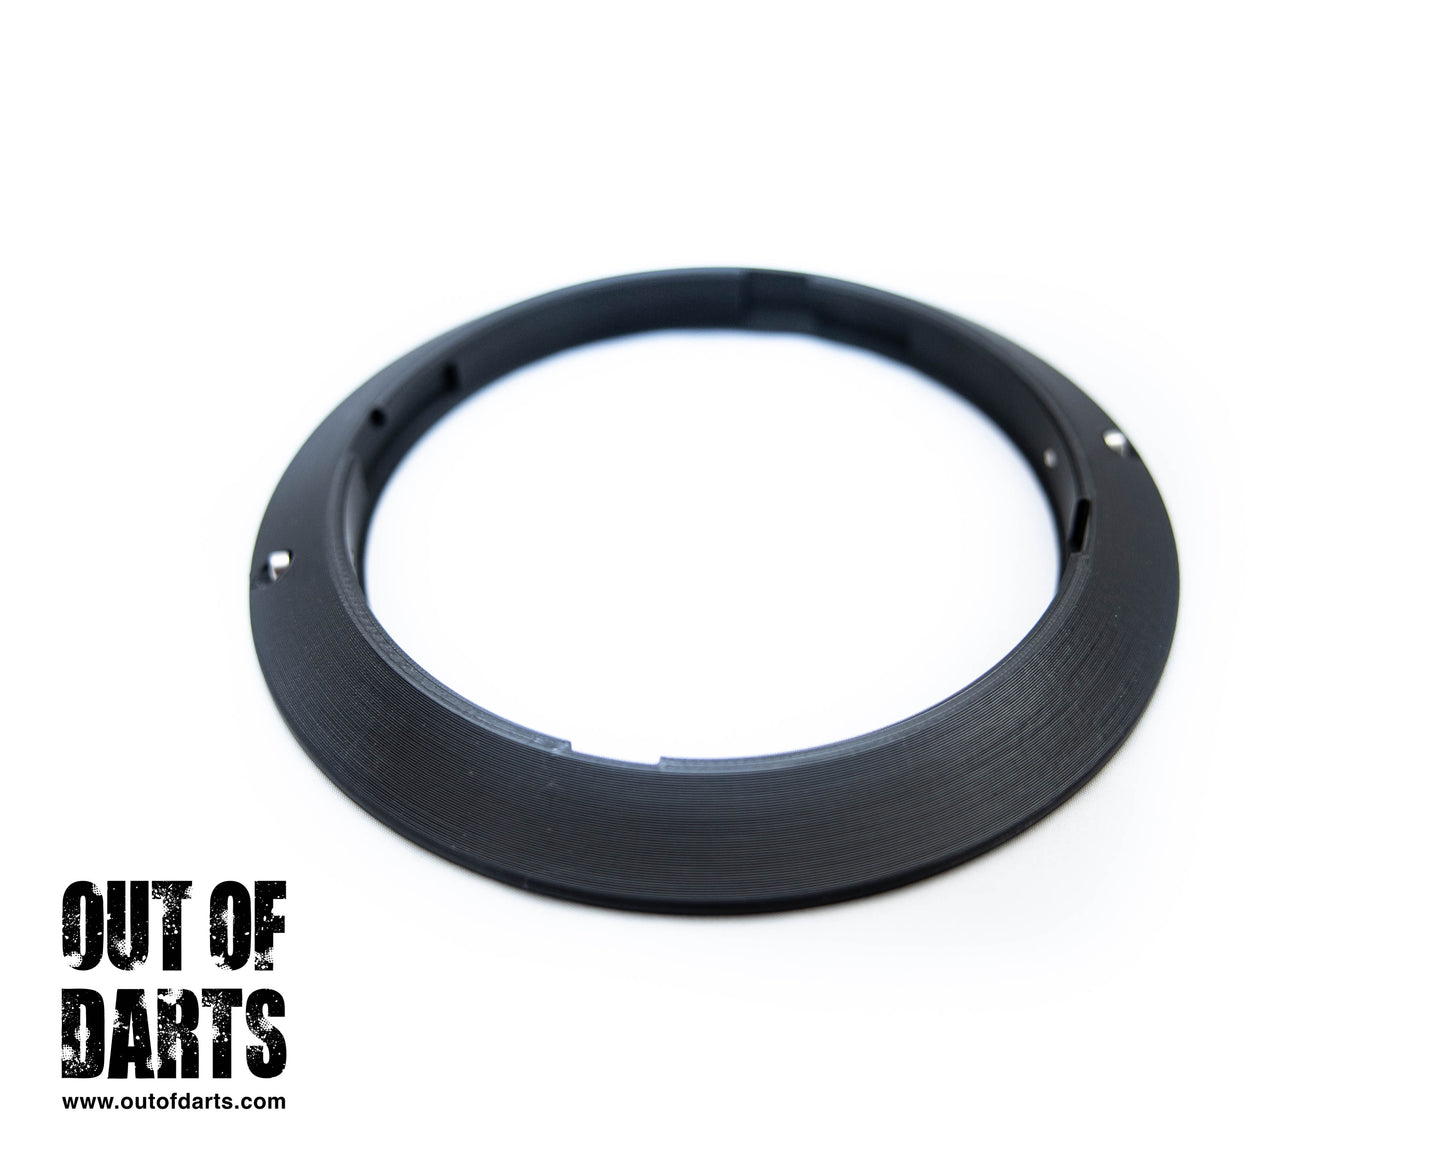 Container adapter ring for the Proton Pack